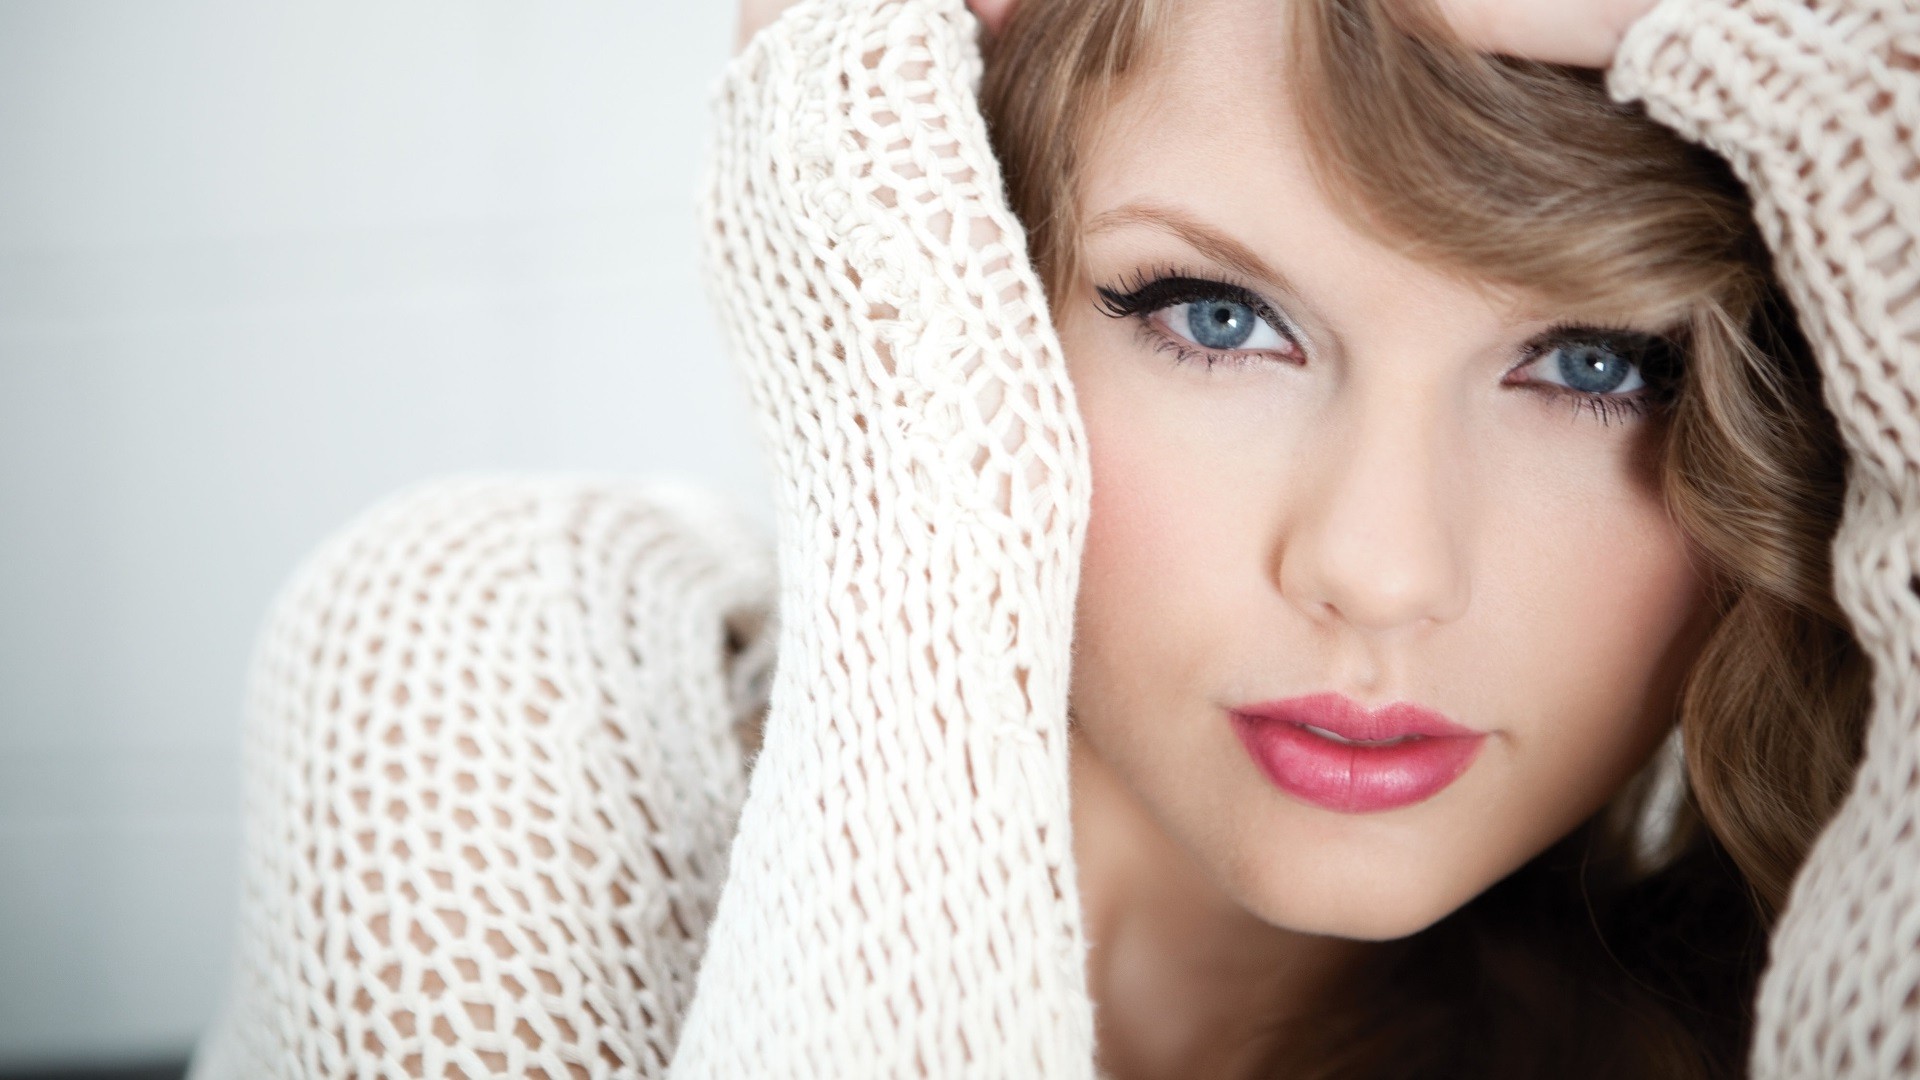 People 1920x1080 women singer long hair Taylor Swift blue eyes celebrity looking at viewer wavy hair face white clothing sweater brunette portrait open mouth red lipstick hands in hair simple background American women closeup makeup